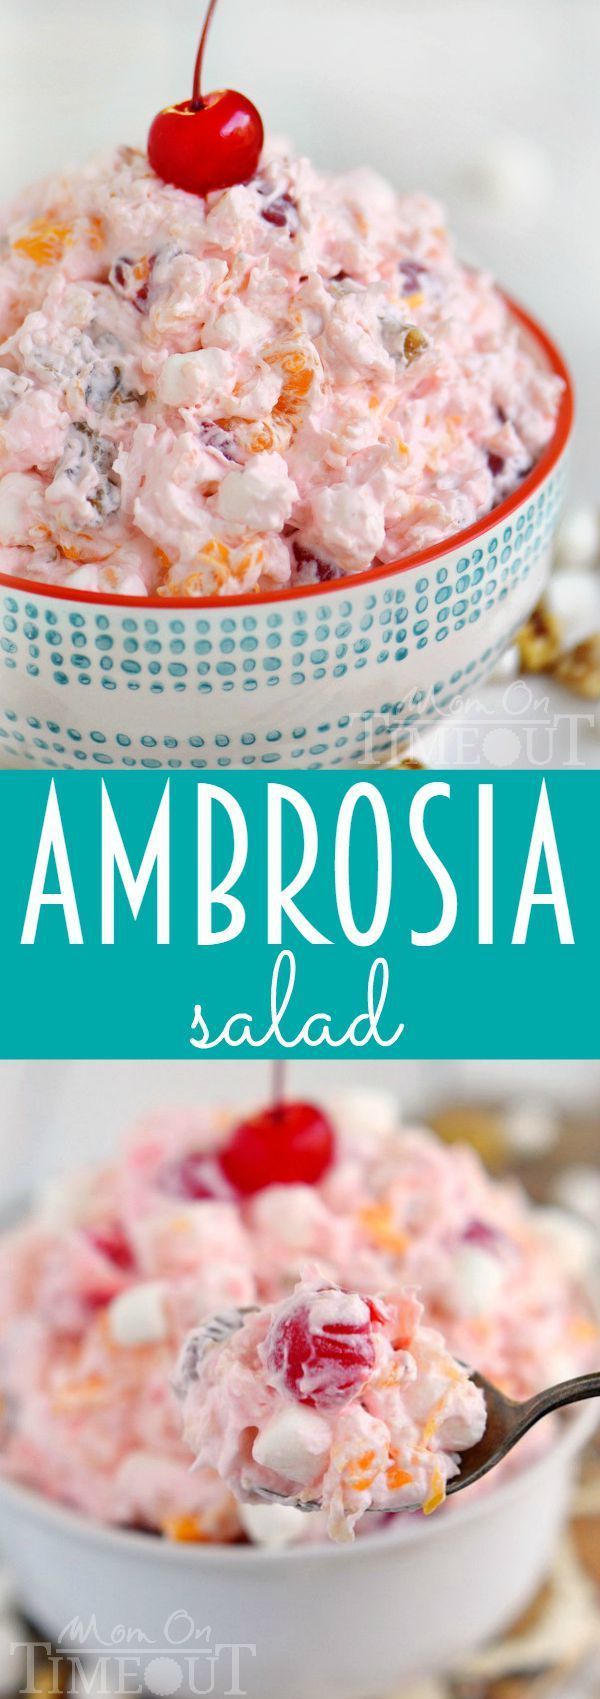 One of my favorite desserts of all time – Ambrosia Salad! So easy to make and alwa